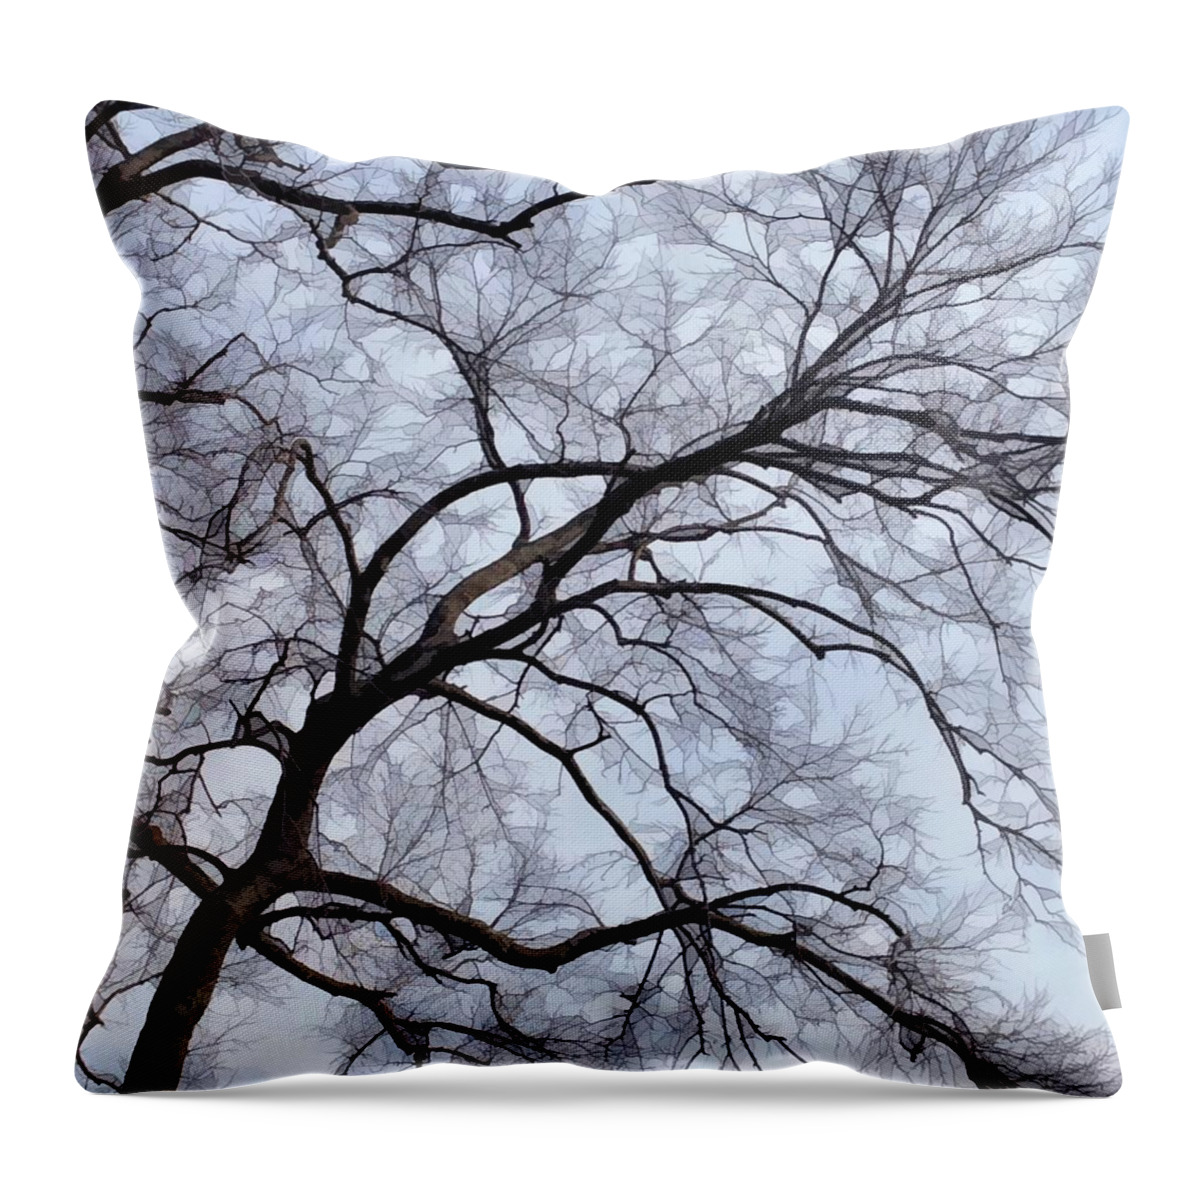 Paintography Throw Pillow featuring the photograph Unseen Enemy by Jeff Iverson